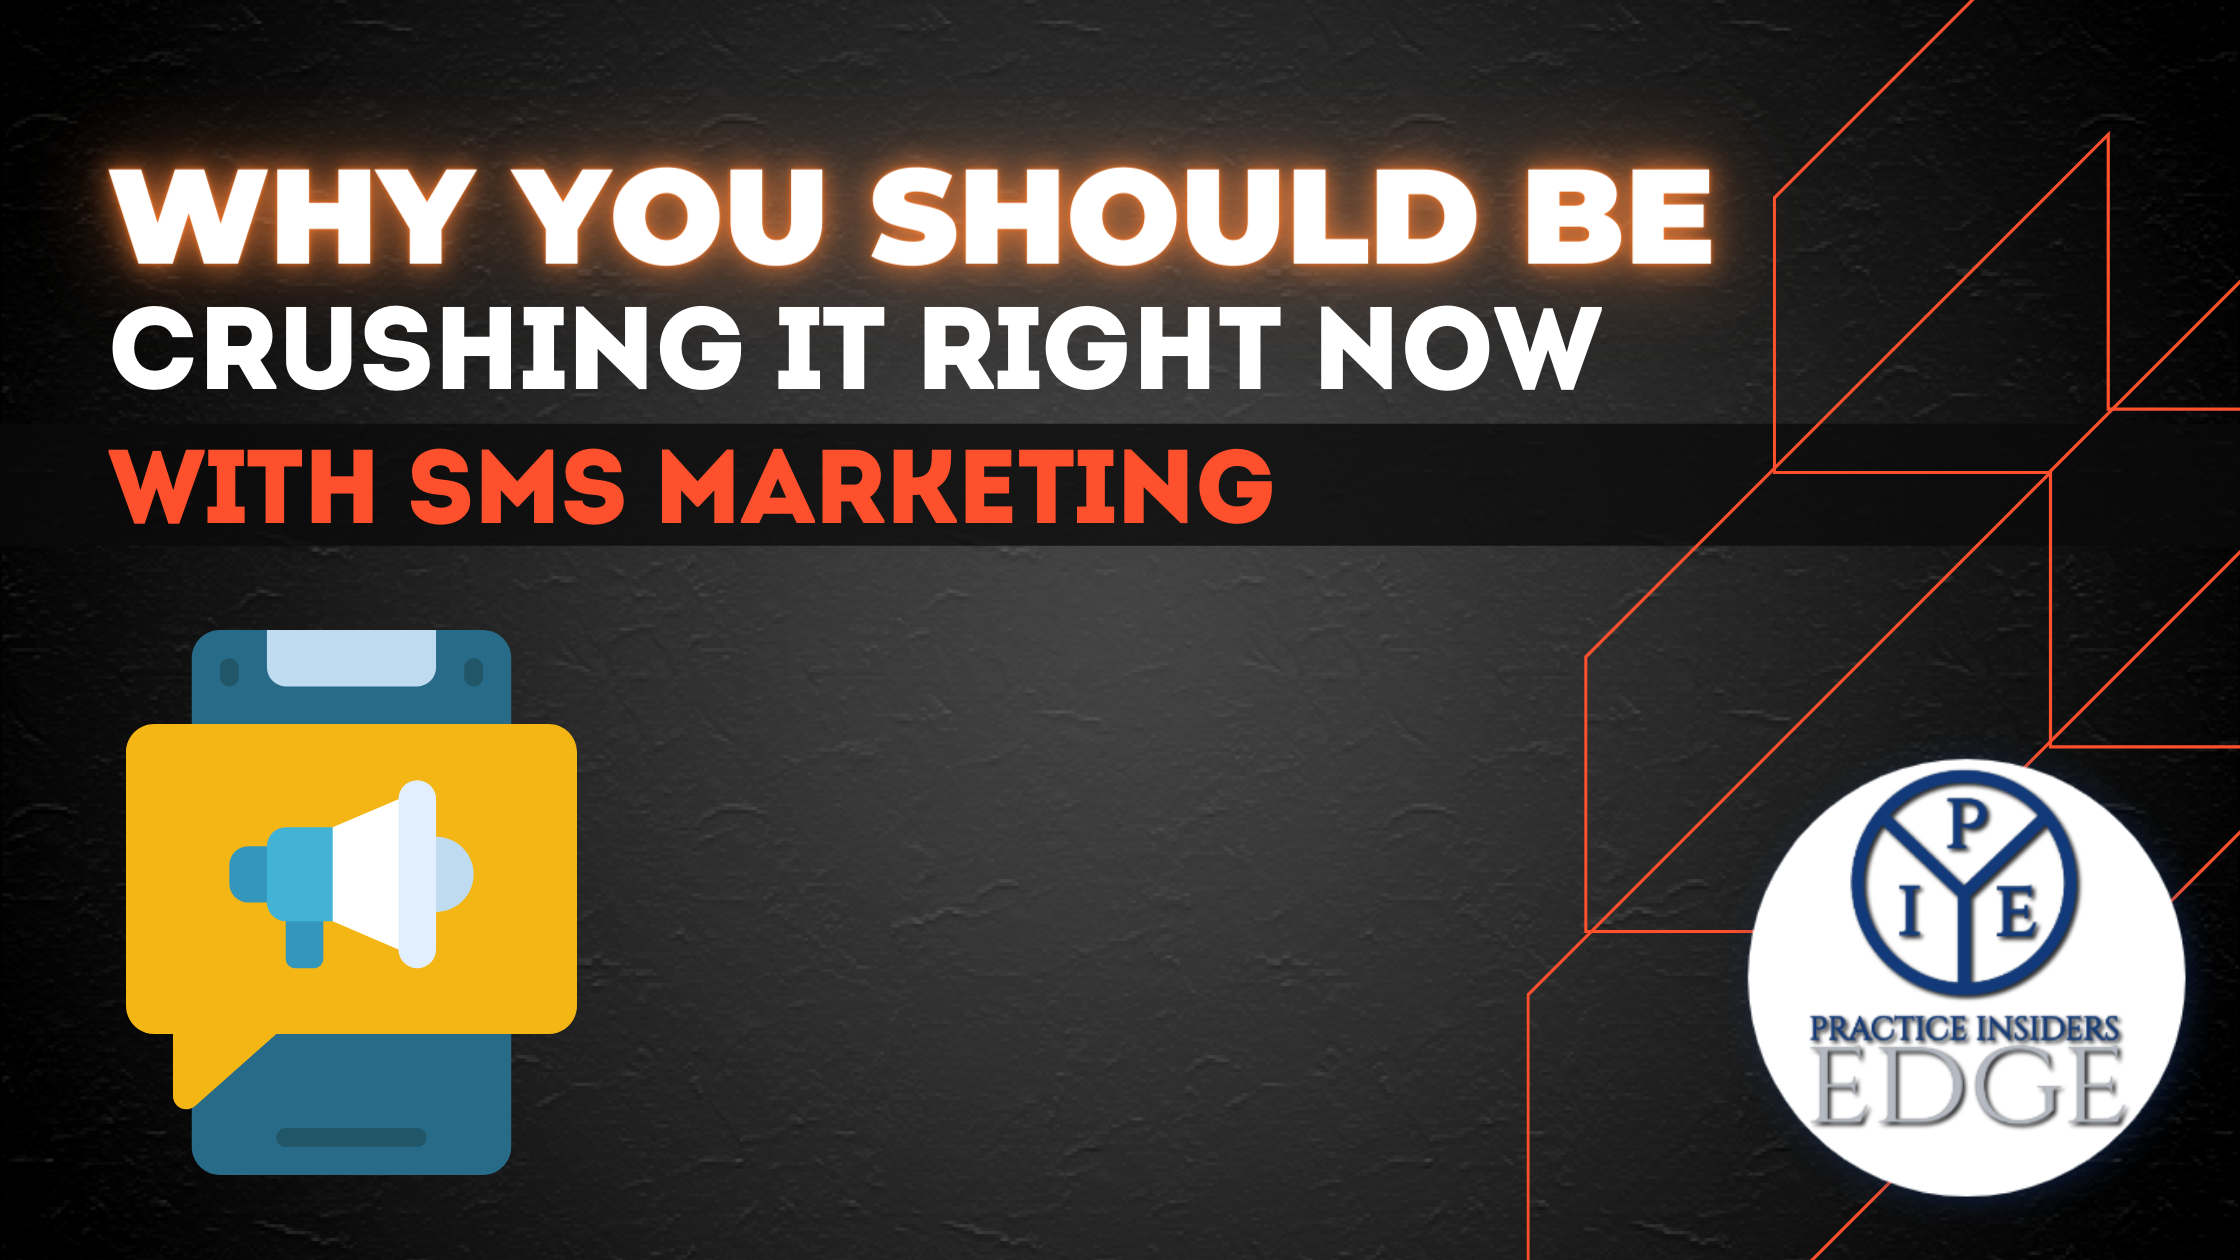 Why You Should Be Crushing It Right Now With SMS Marketing